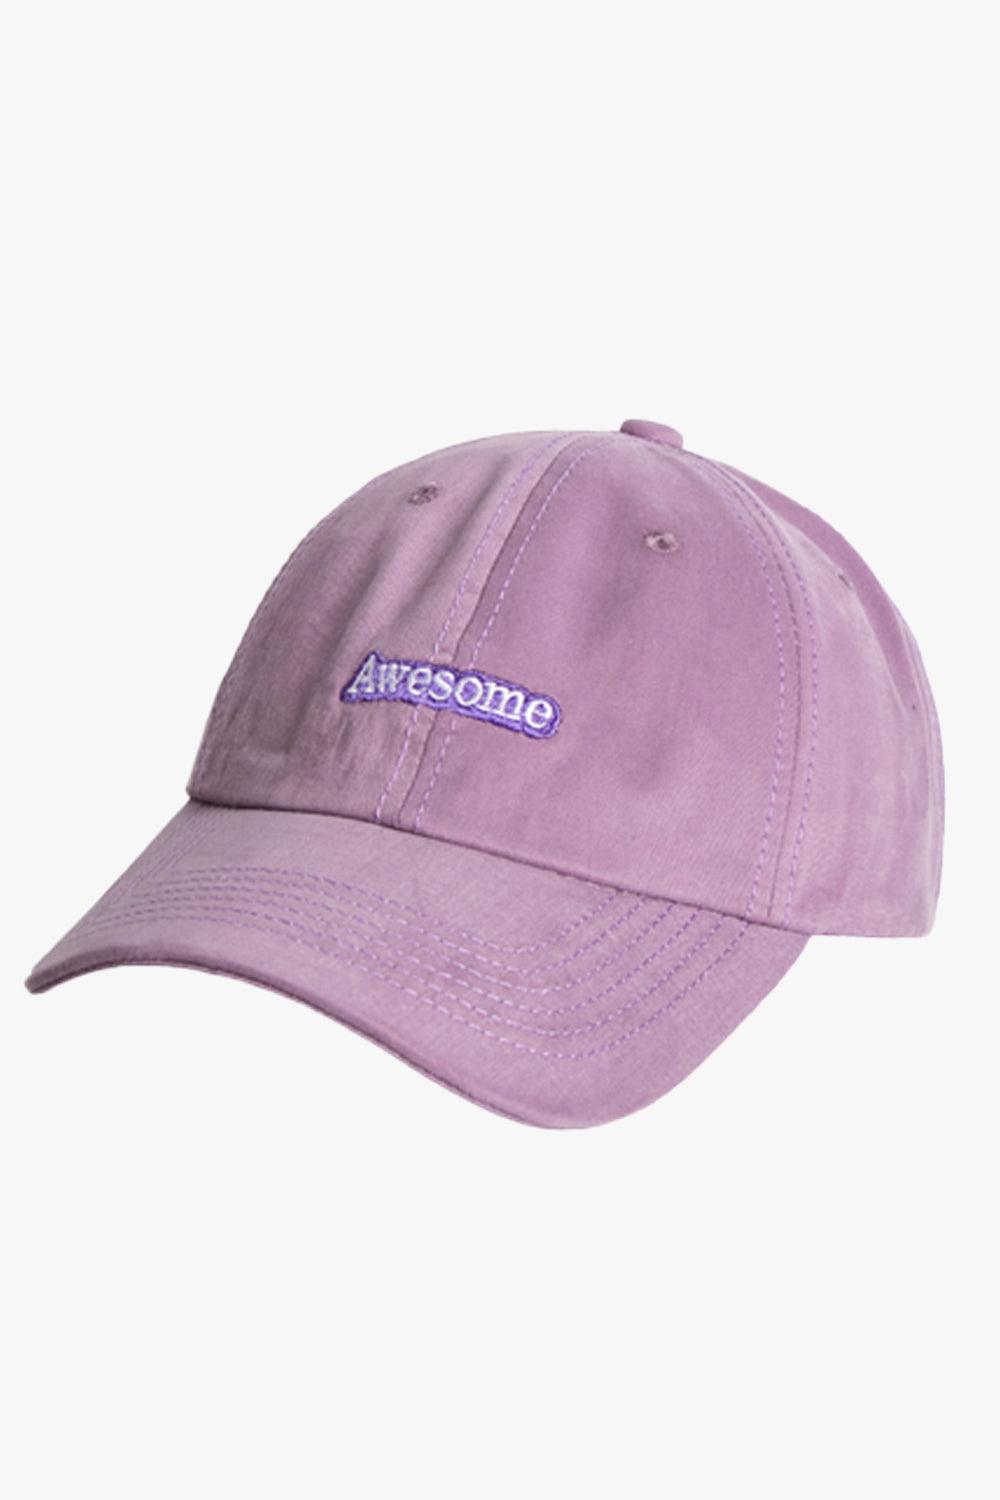 Awesome Aesthetic Baseball Cap - Aesthetic Clothes Shop